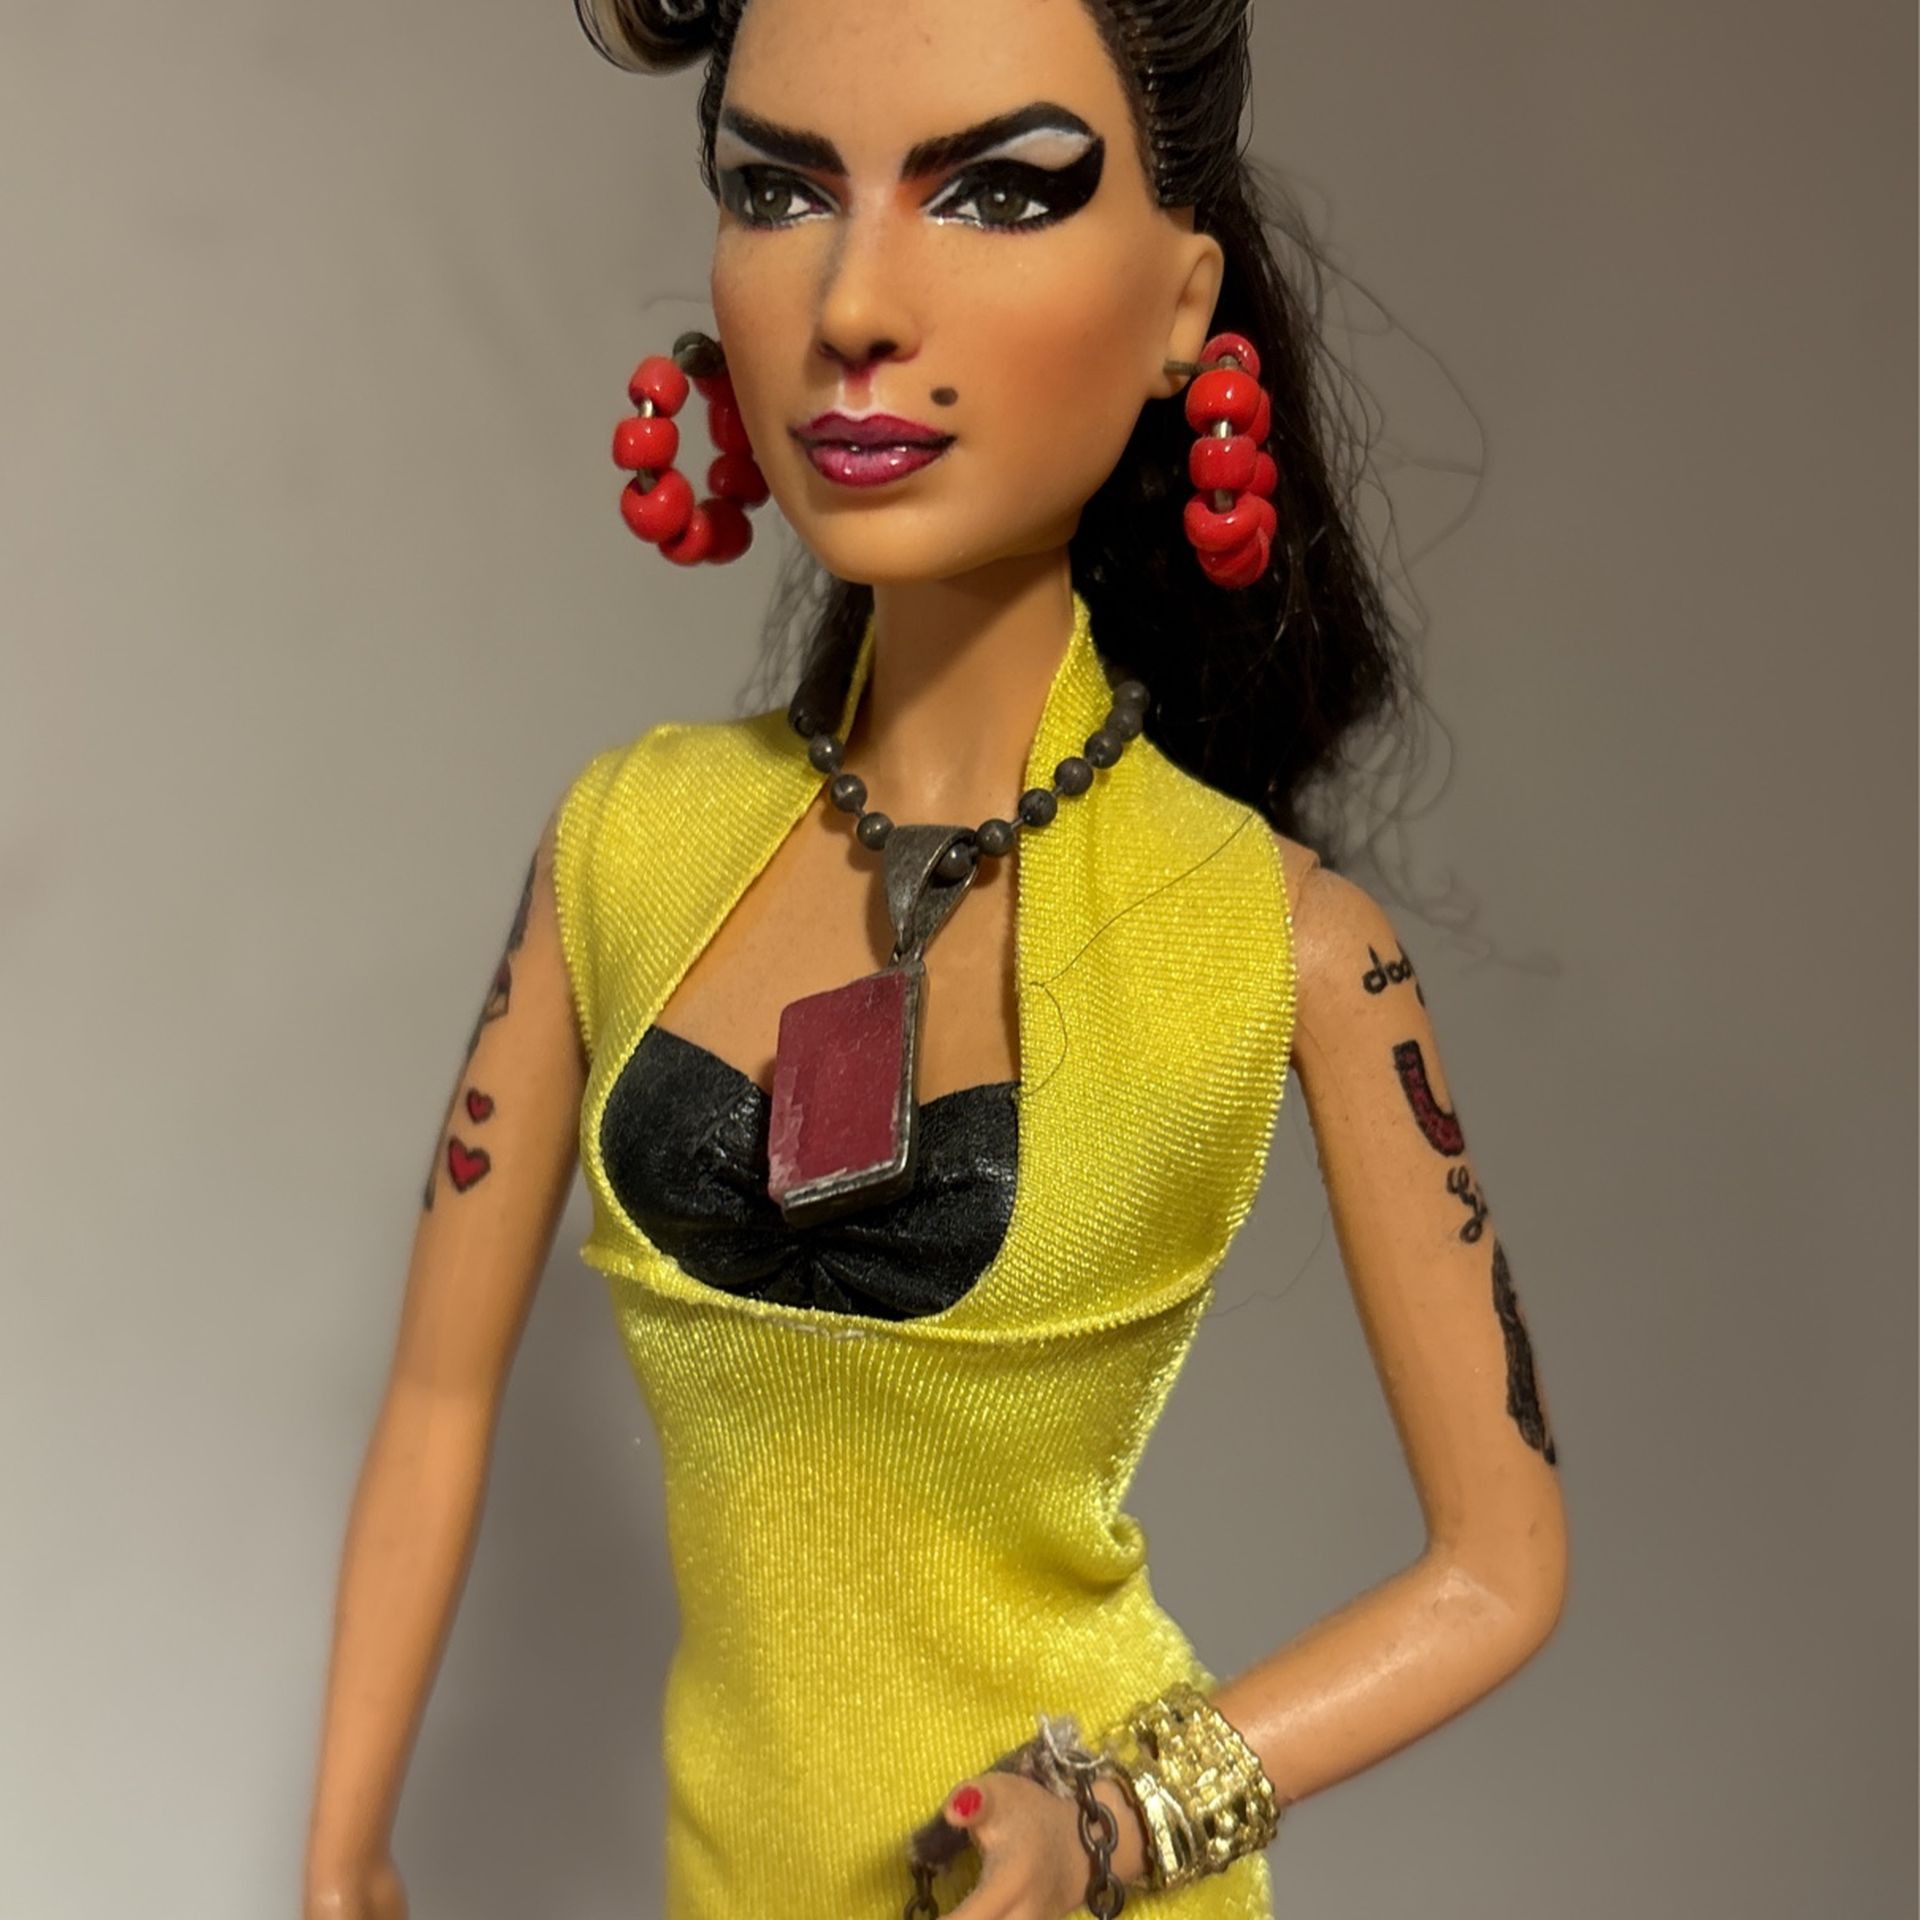 Rare Collectible Impossible To Find Authentic Barbie Doll Tribute To Amy Winehouse 